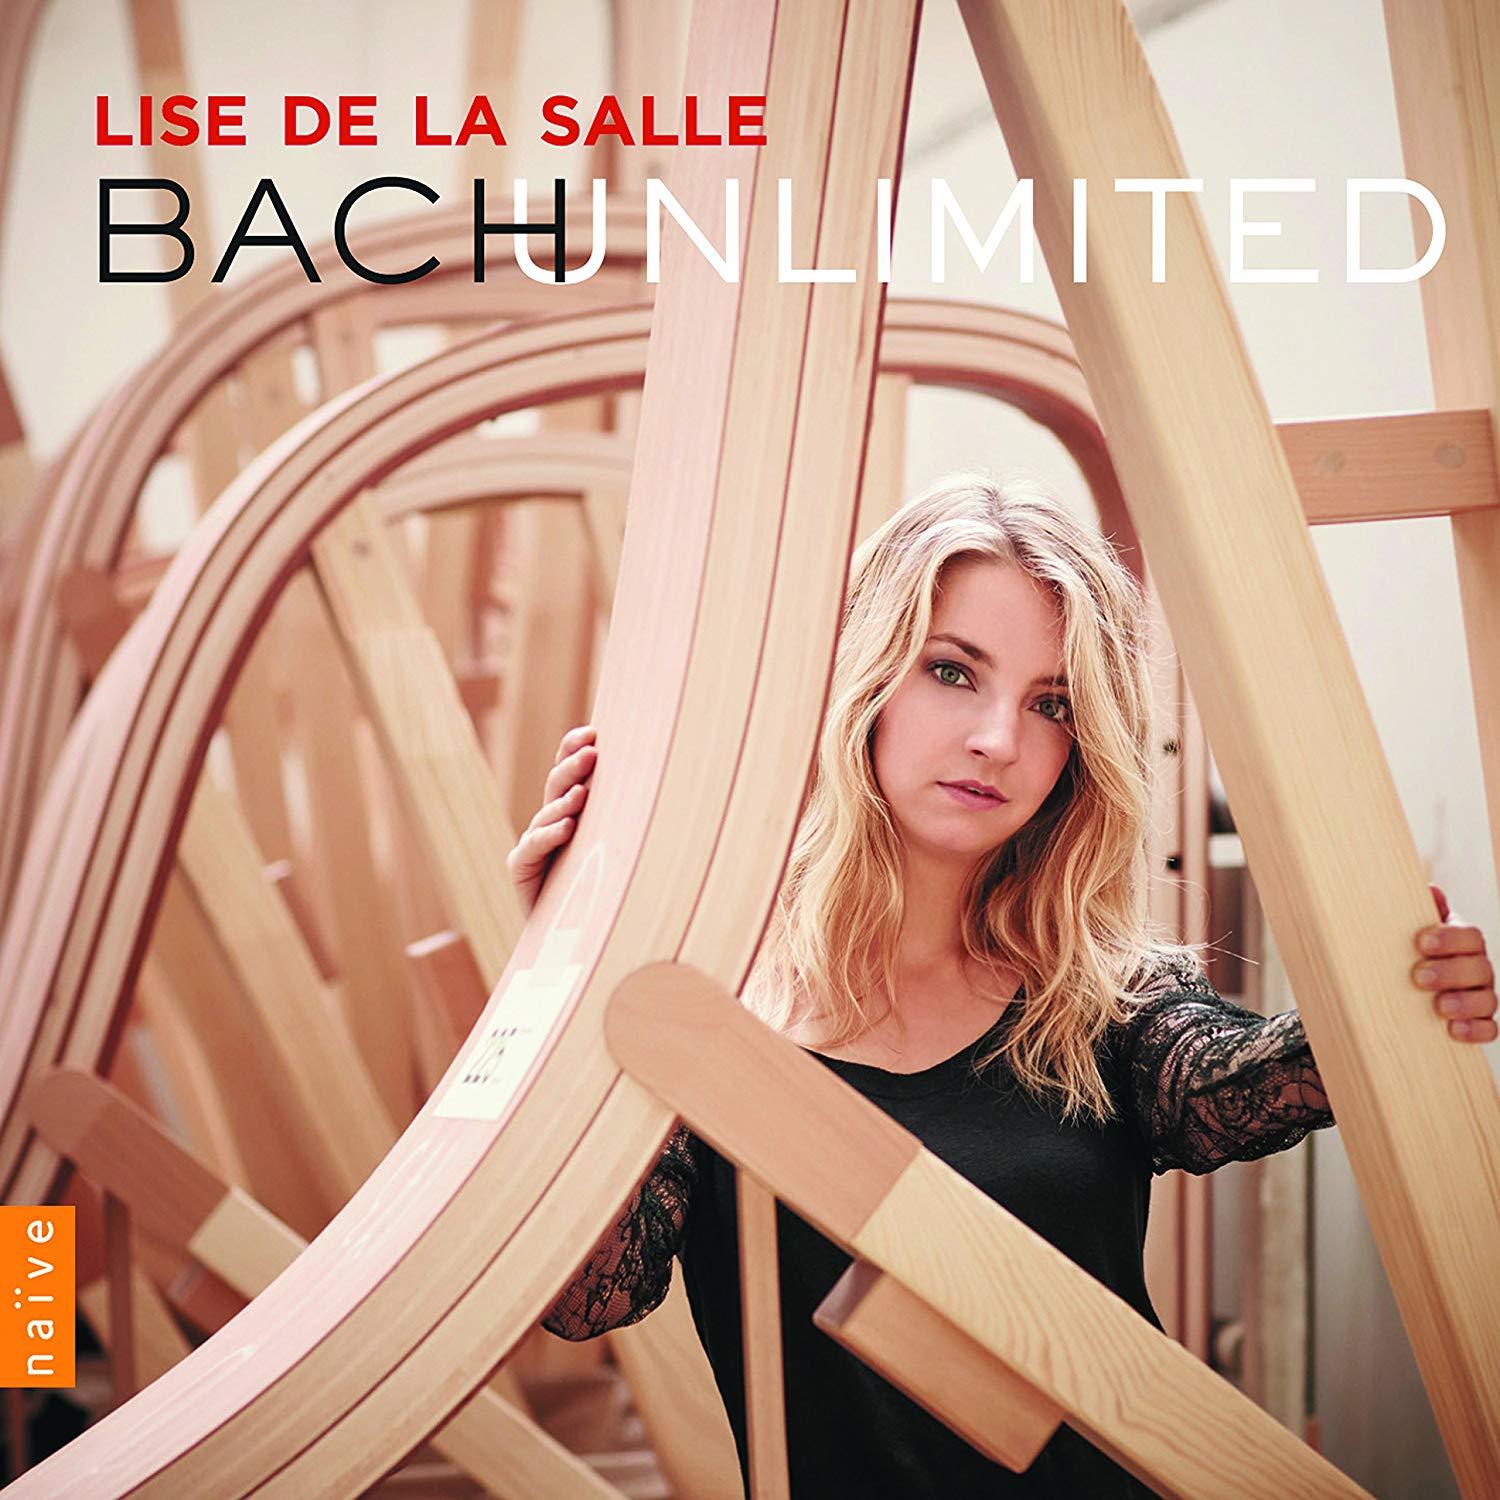 Bach: Unlimited